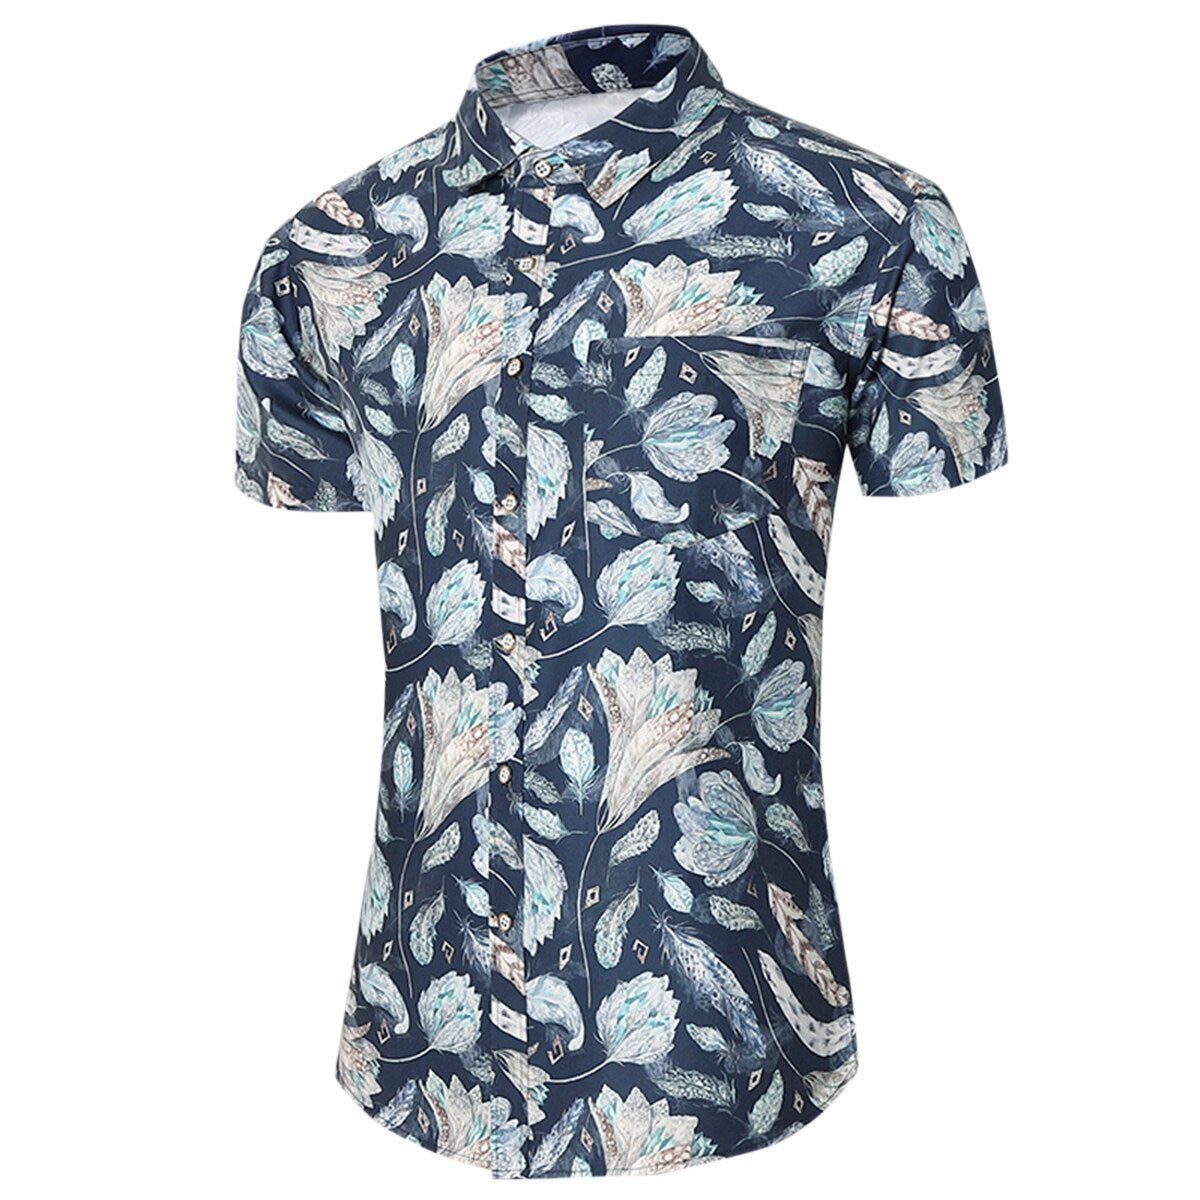 Men's Printed Short-Sleeve White Flower Casual Shirts Blue